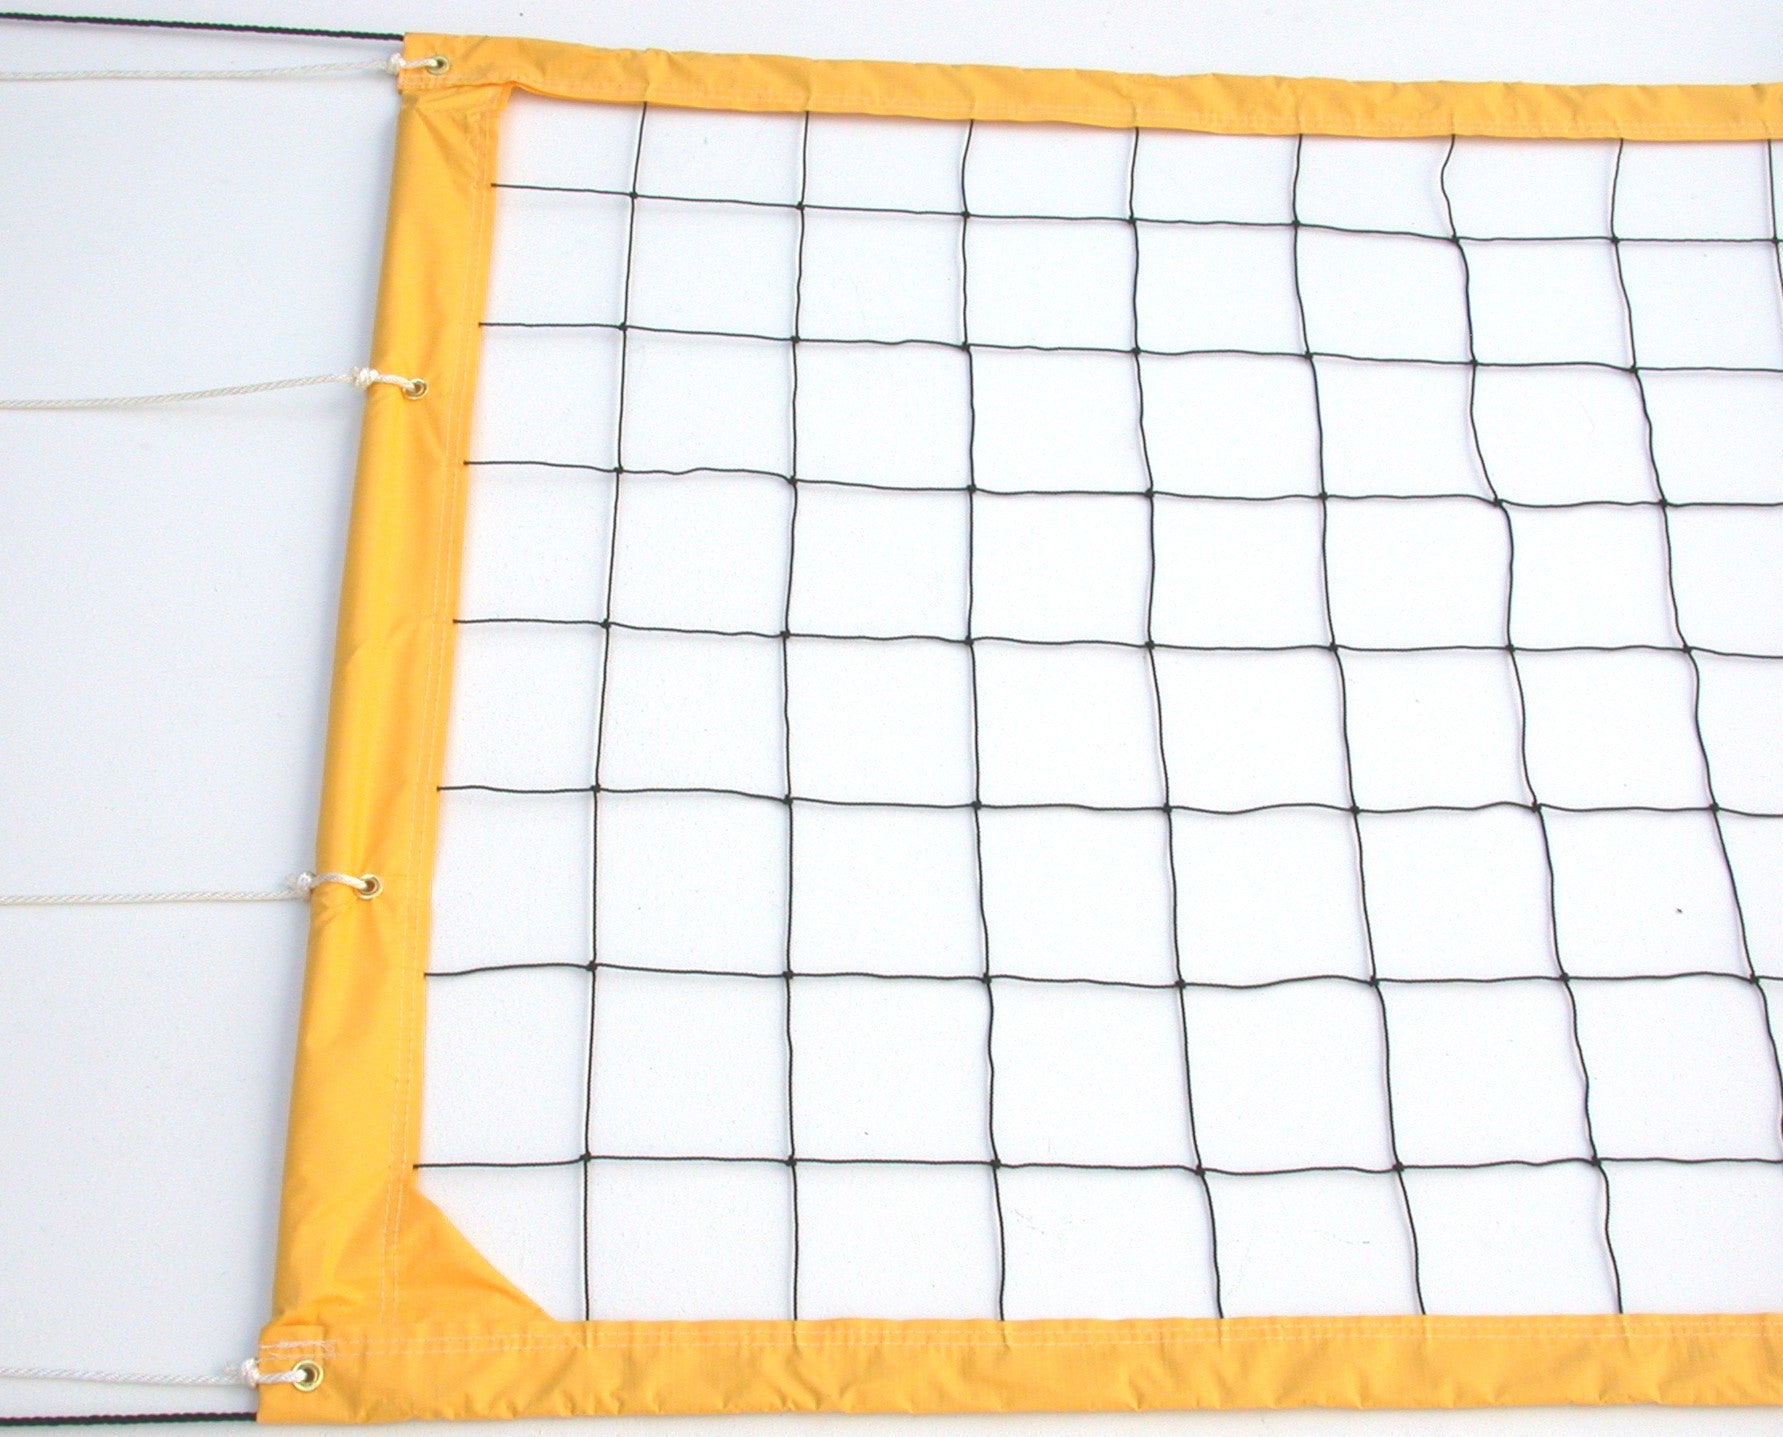 CNRY-Power Volleyball Net Twisted Rope Yellow Vinyl